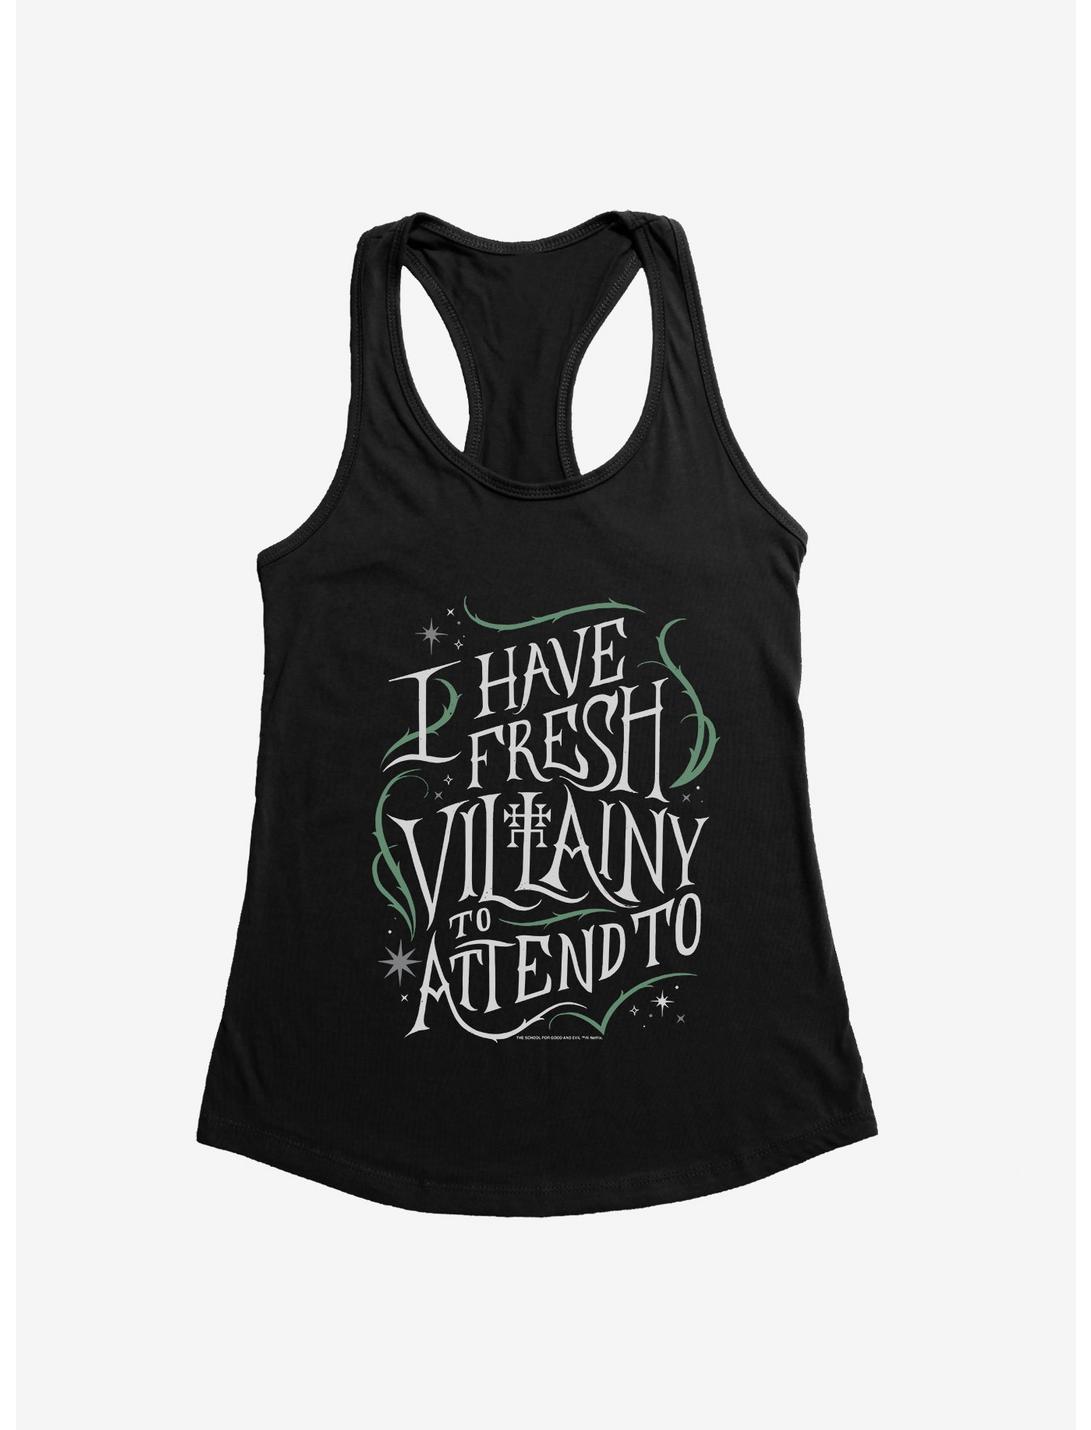 The School For Good And Evil Villainy Girls Tank, BLACK, hi-res